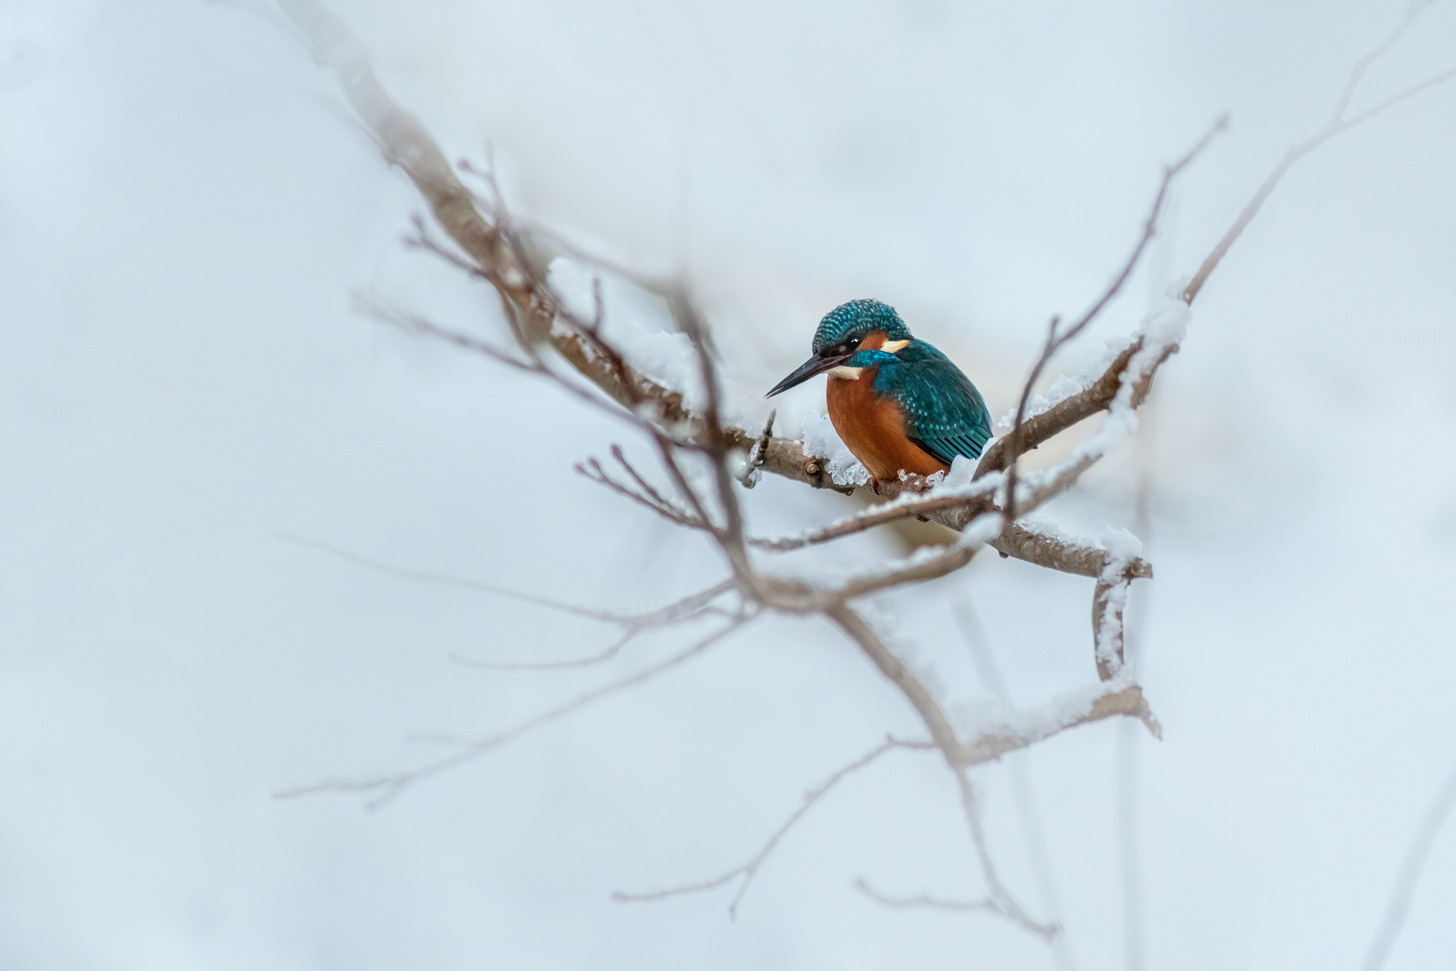 A colorful bird in the snow; vignette applied